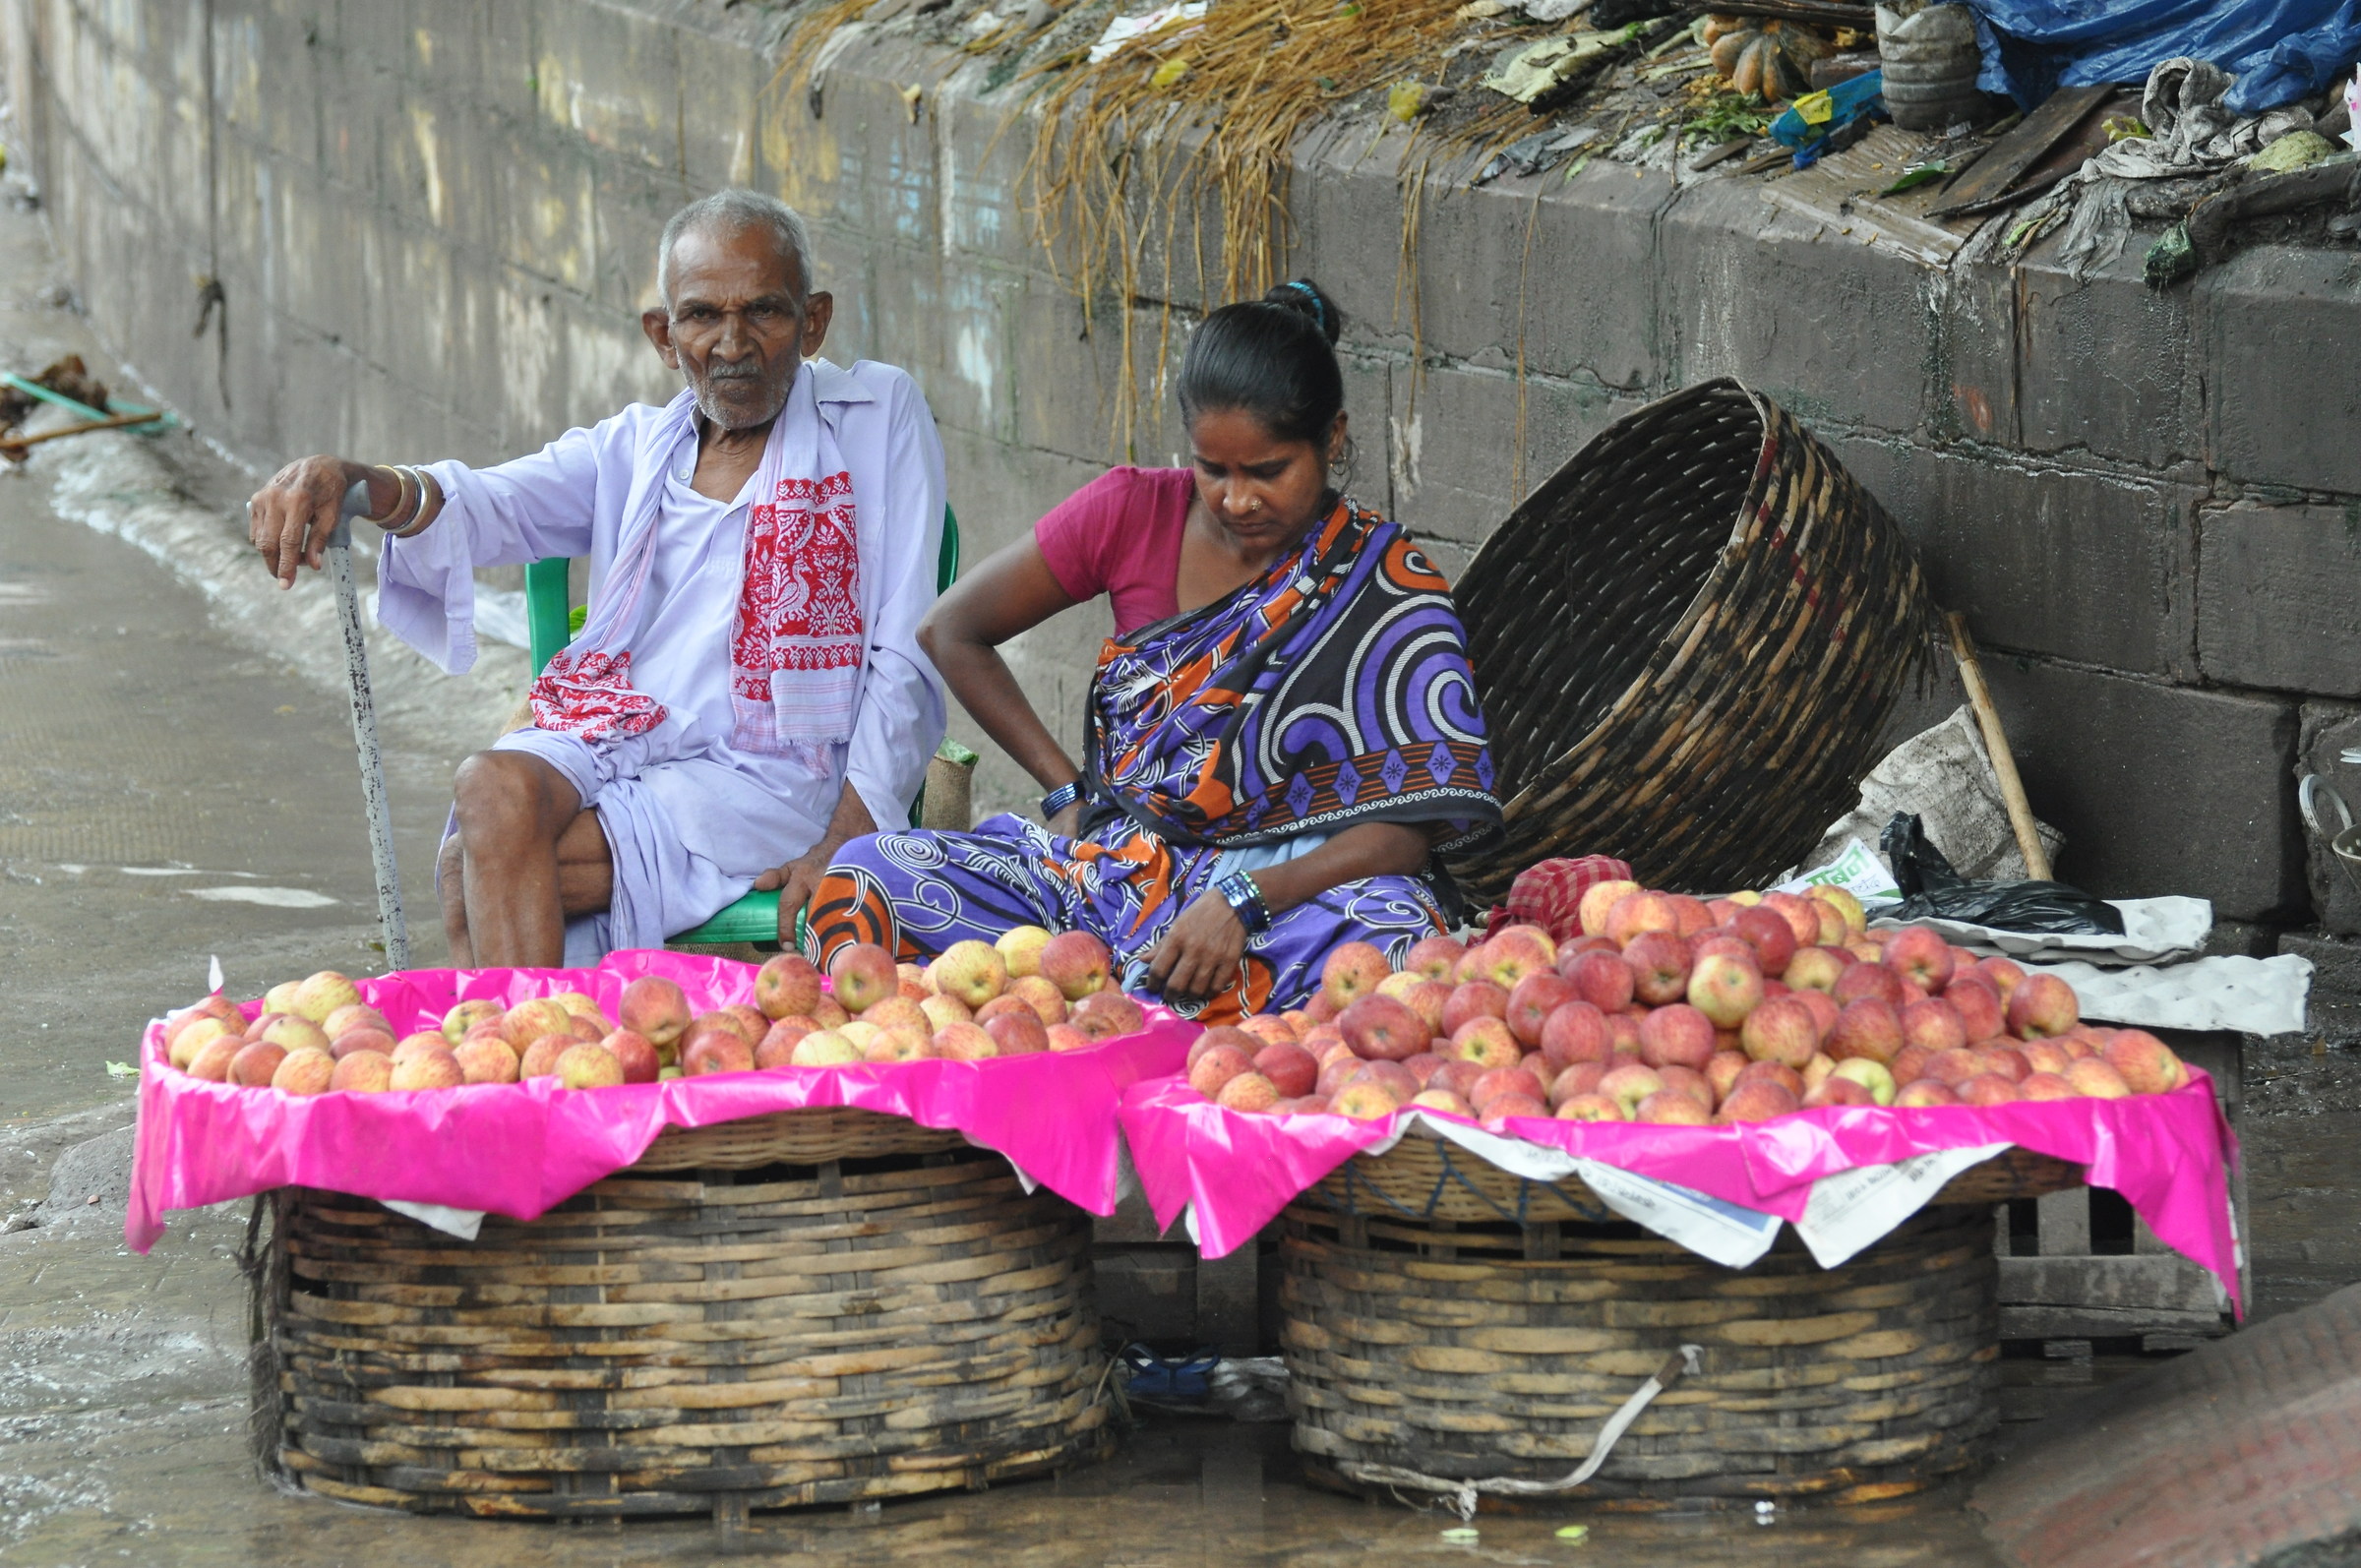 sellers of apples in Calcutta...